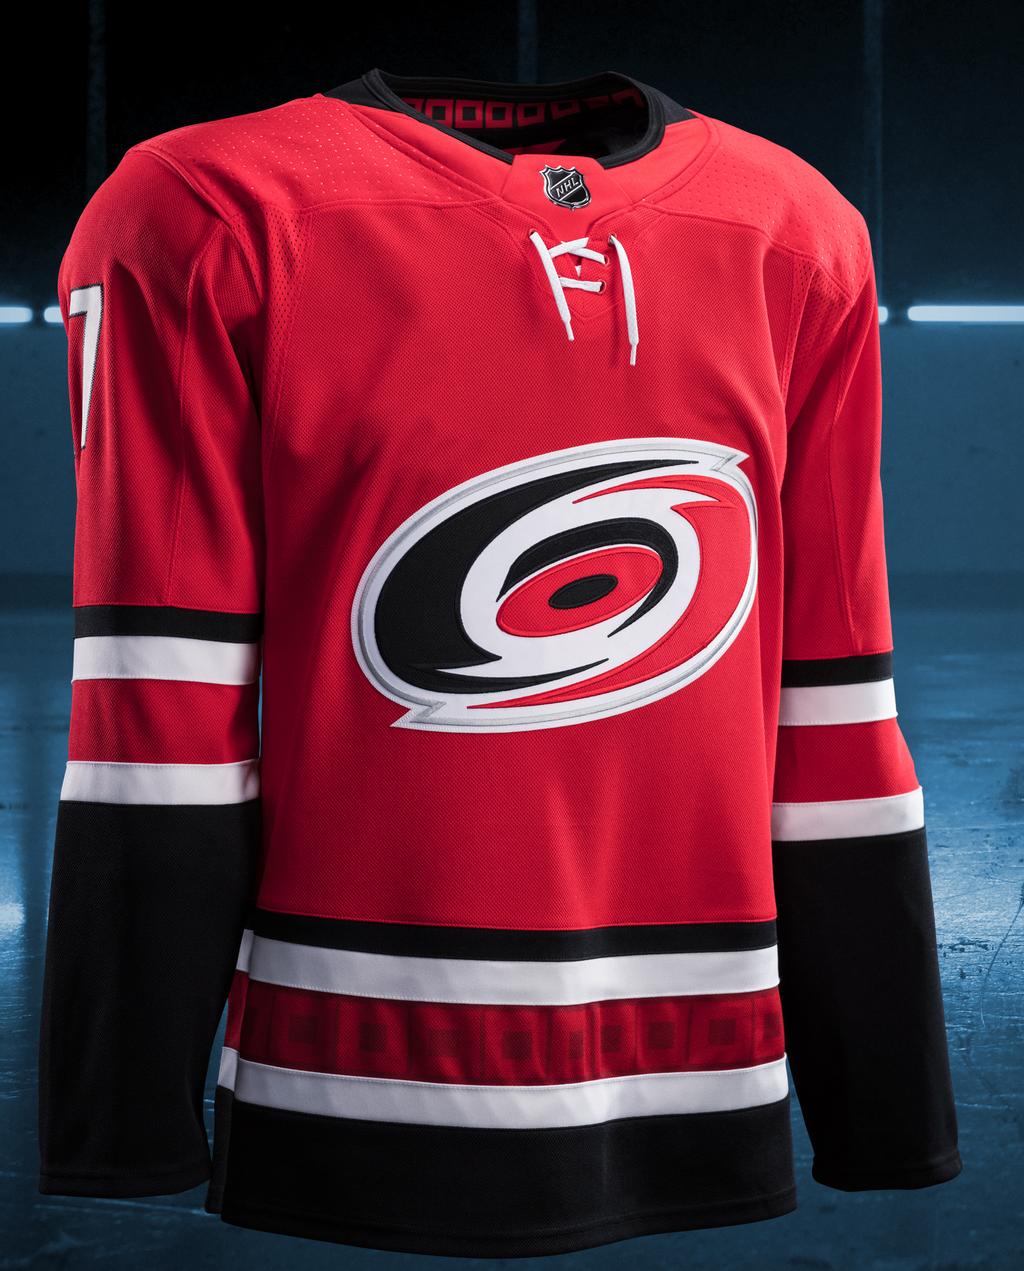 Gallery: New NHL jerseys for 2017-18